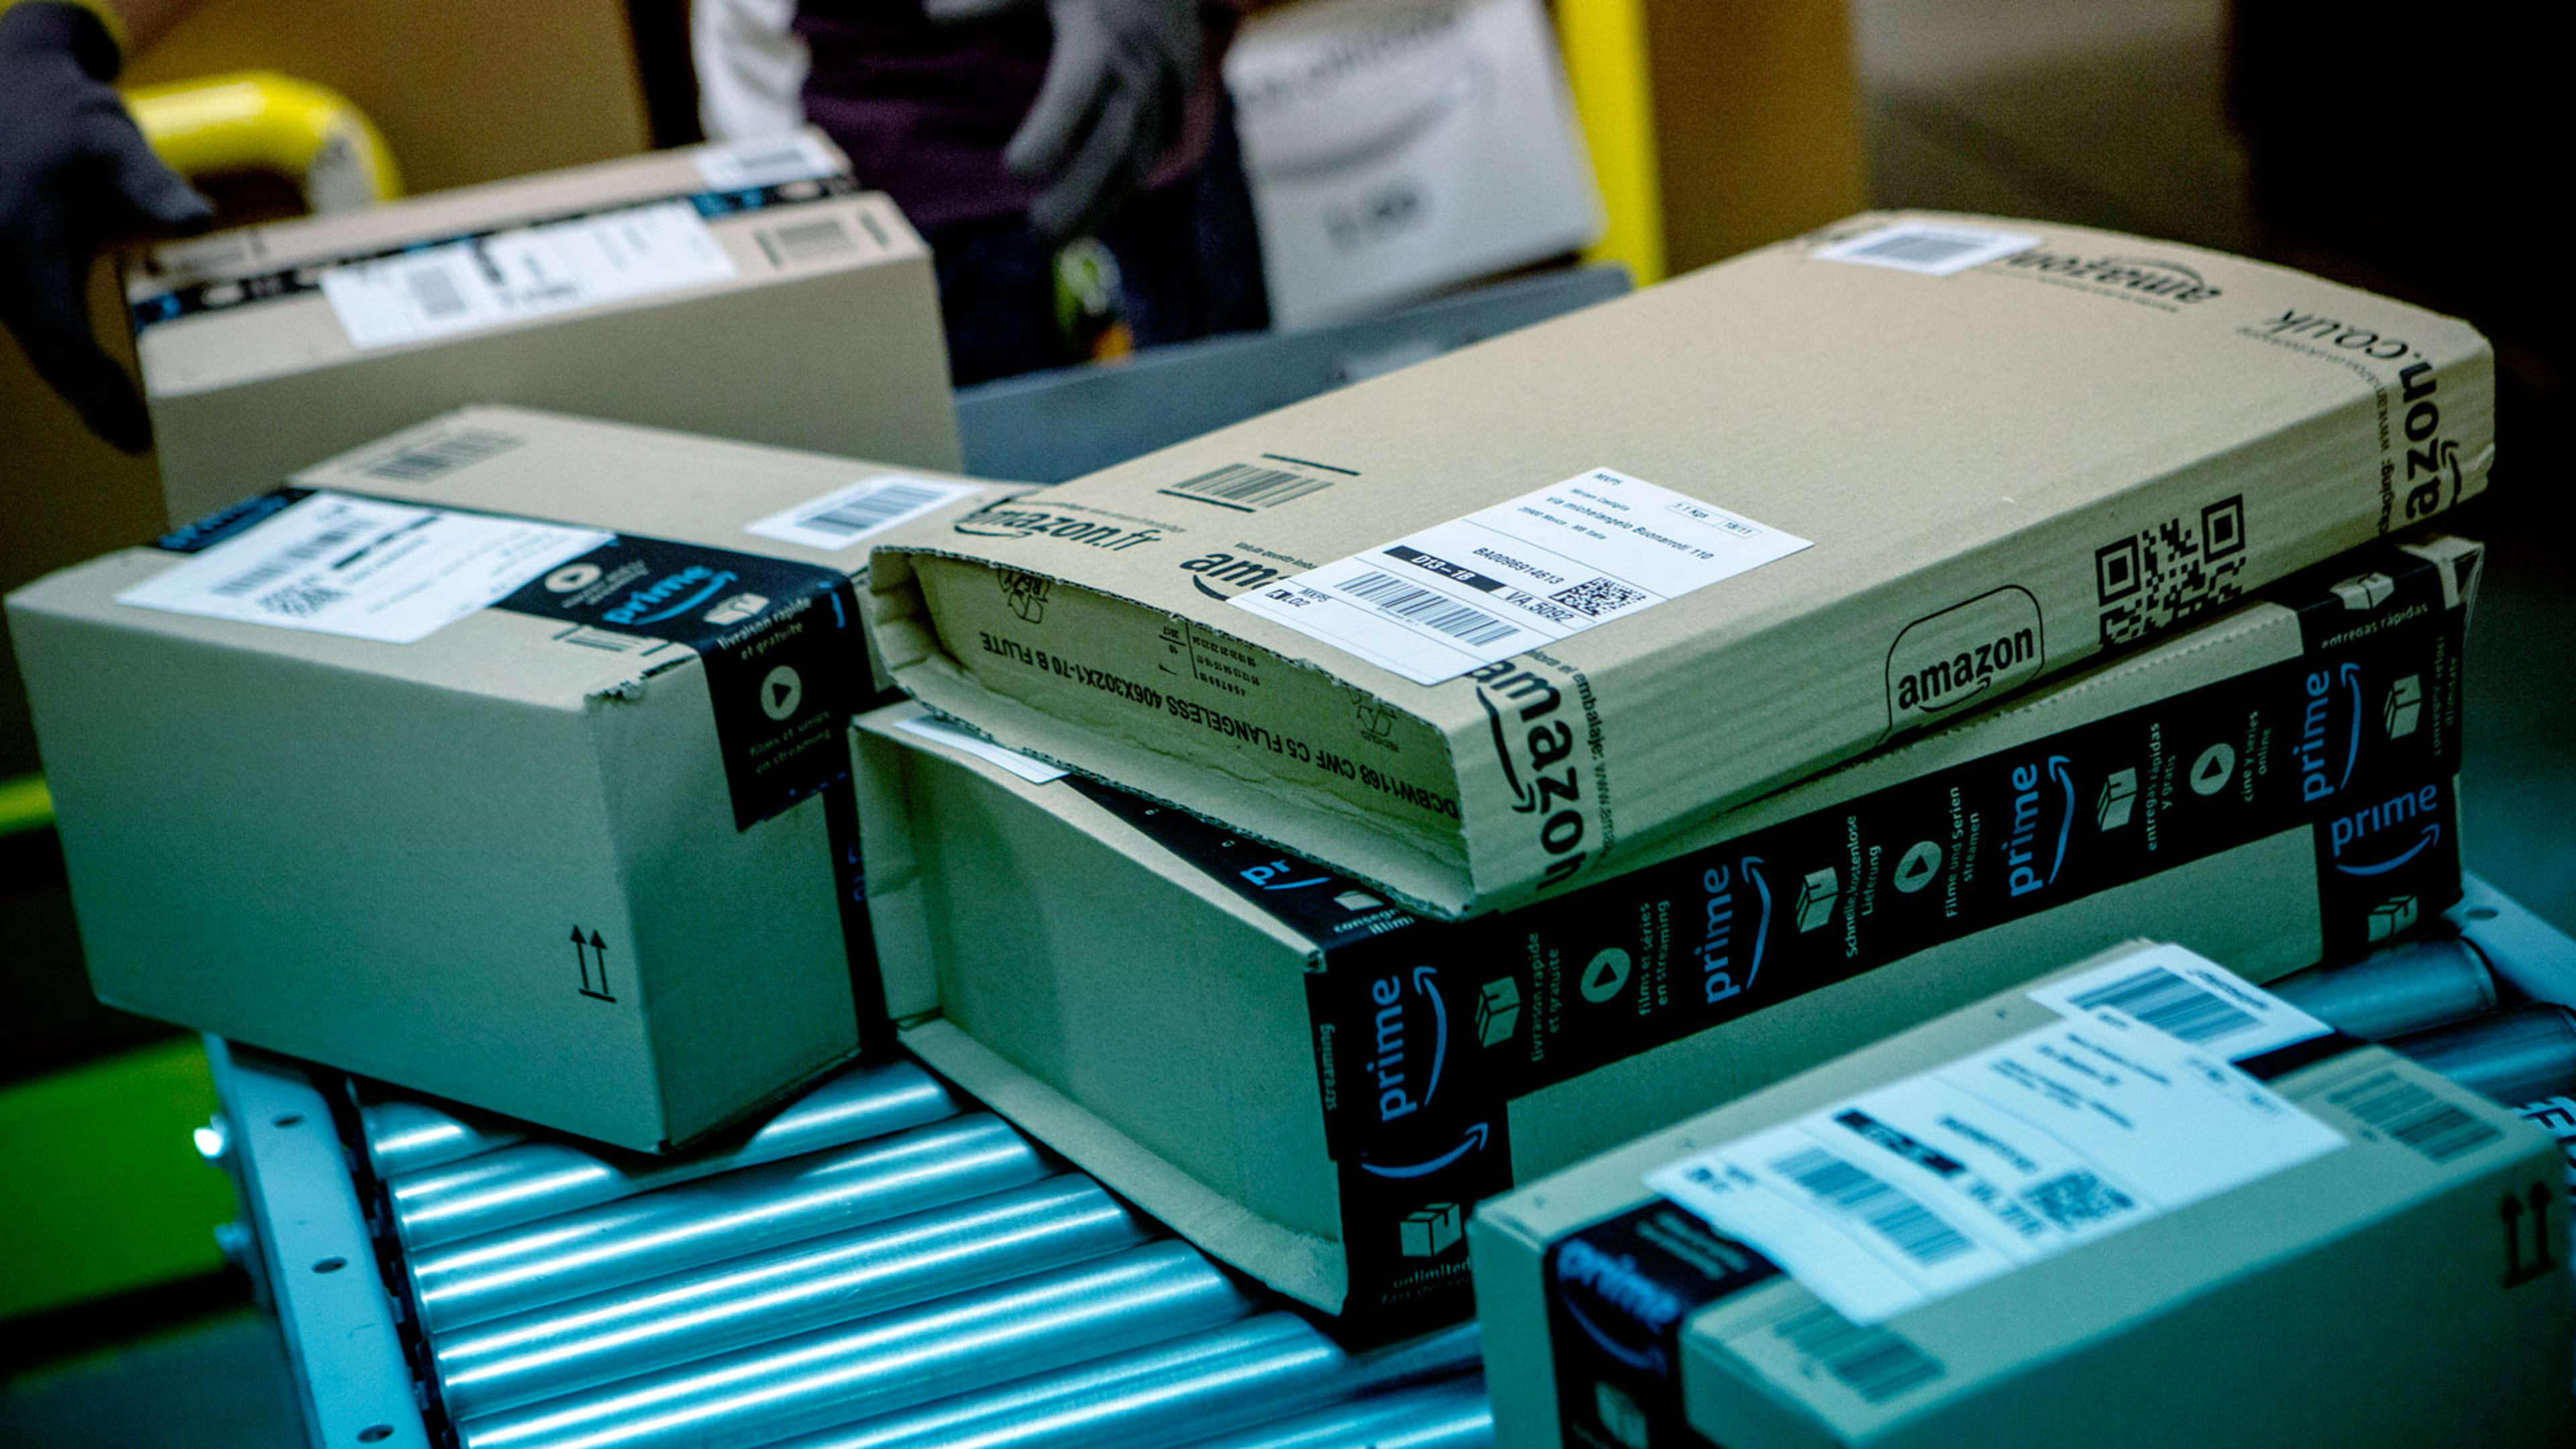 Take a break from Amazon and read this brief history of how Cyber Monday got its name